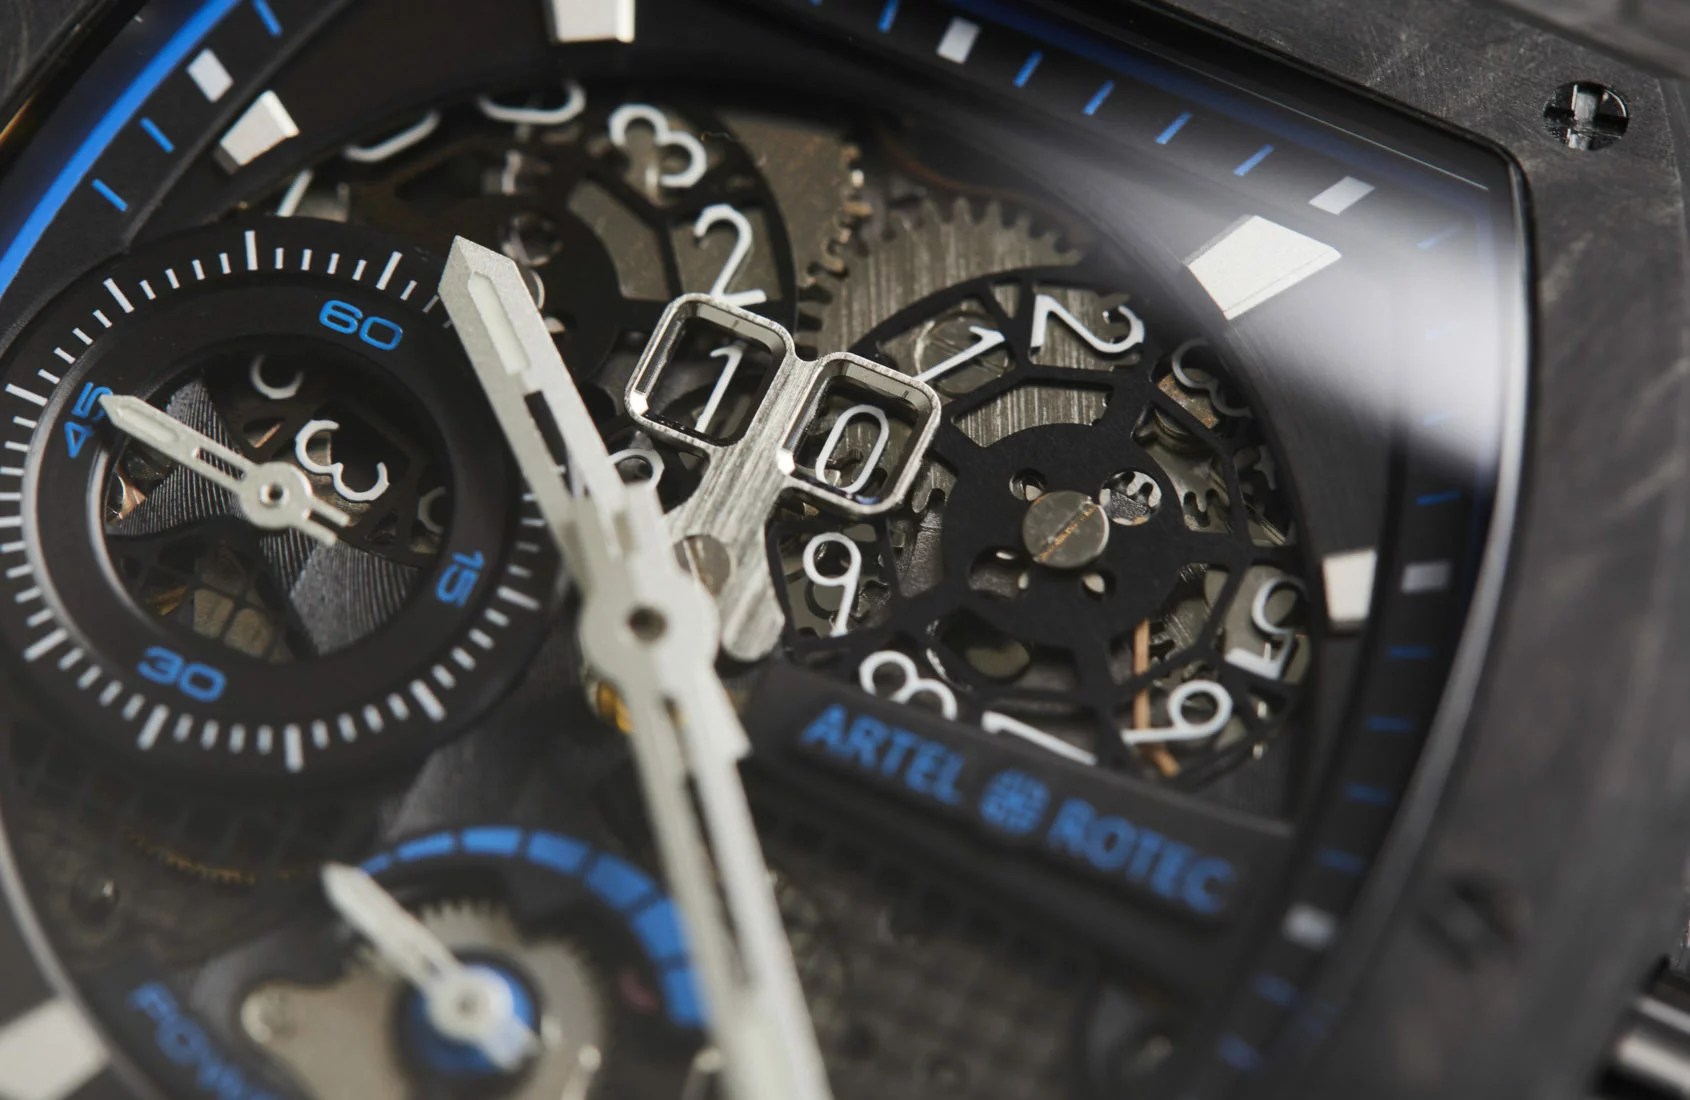 Sponsored: Swiss Made, Los Angeles Born – Artel Rotec Debuts with